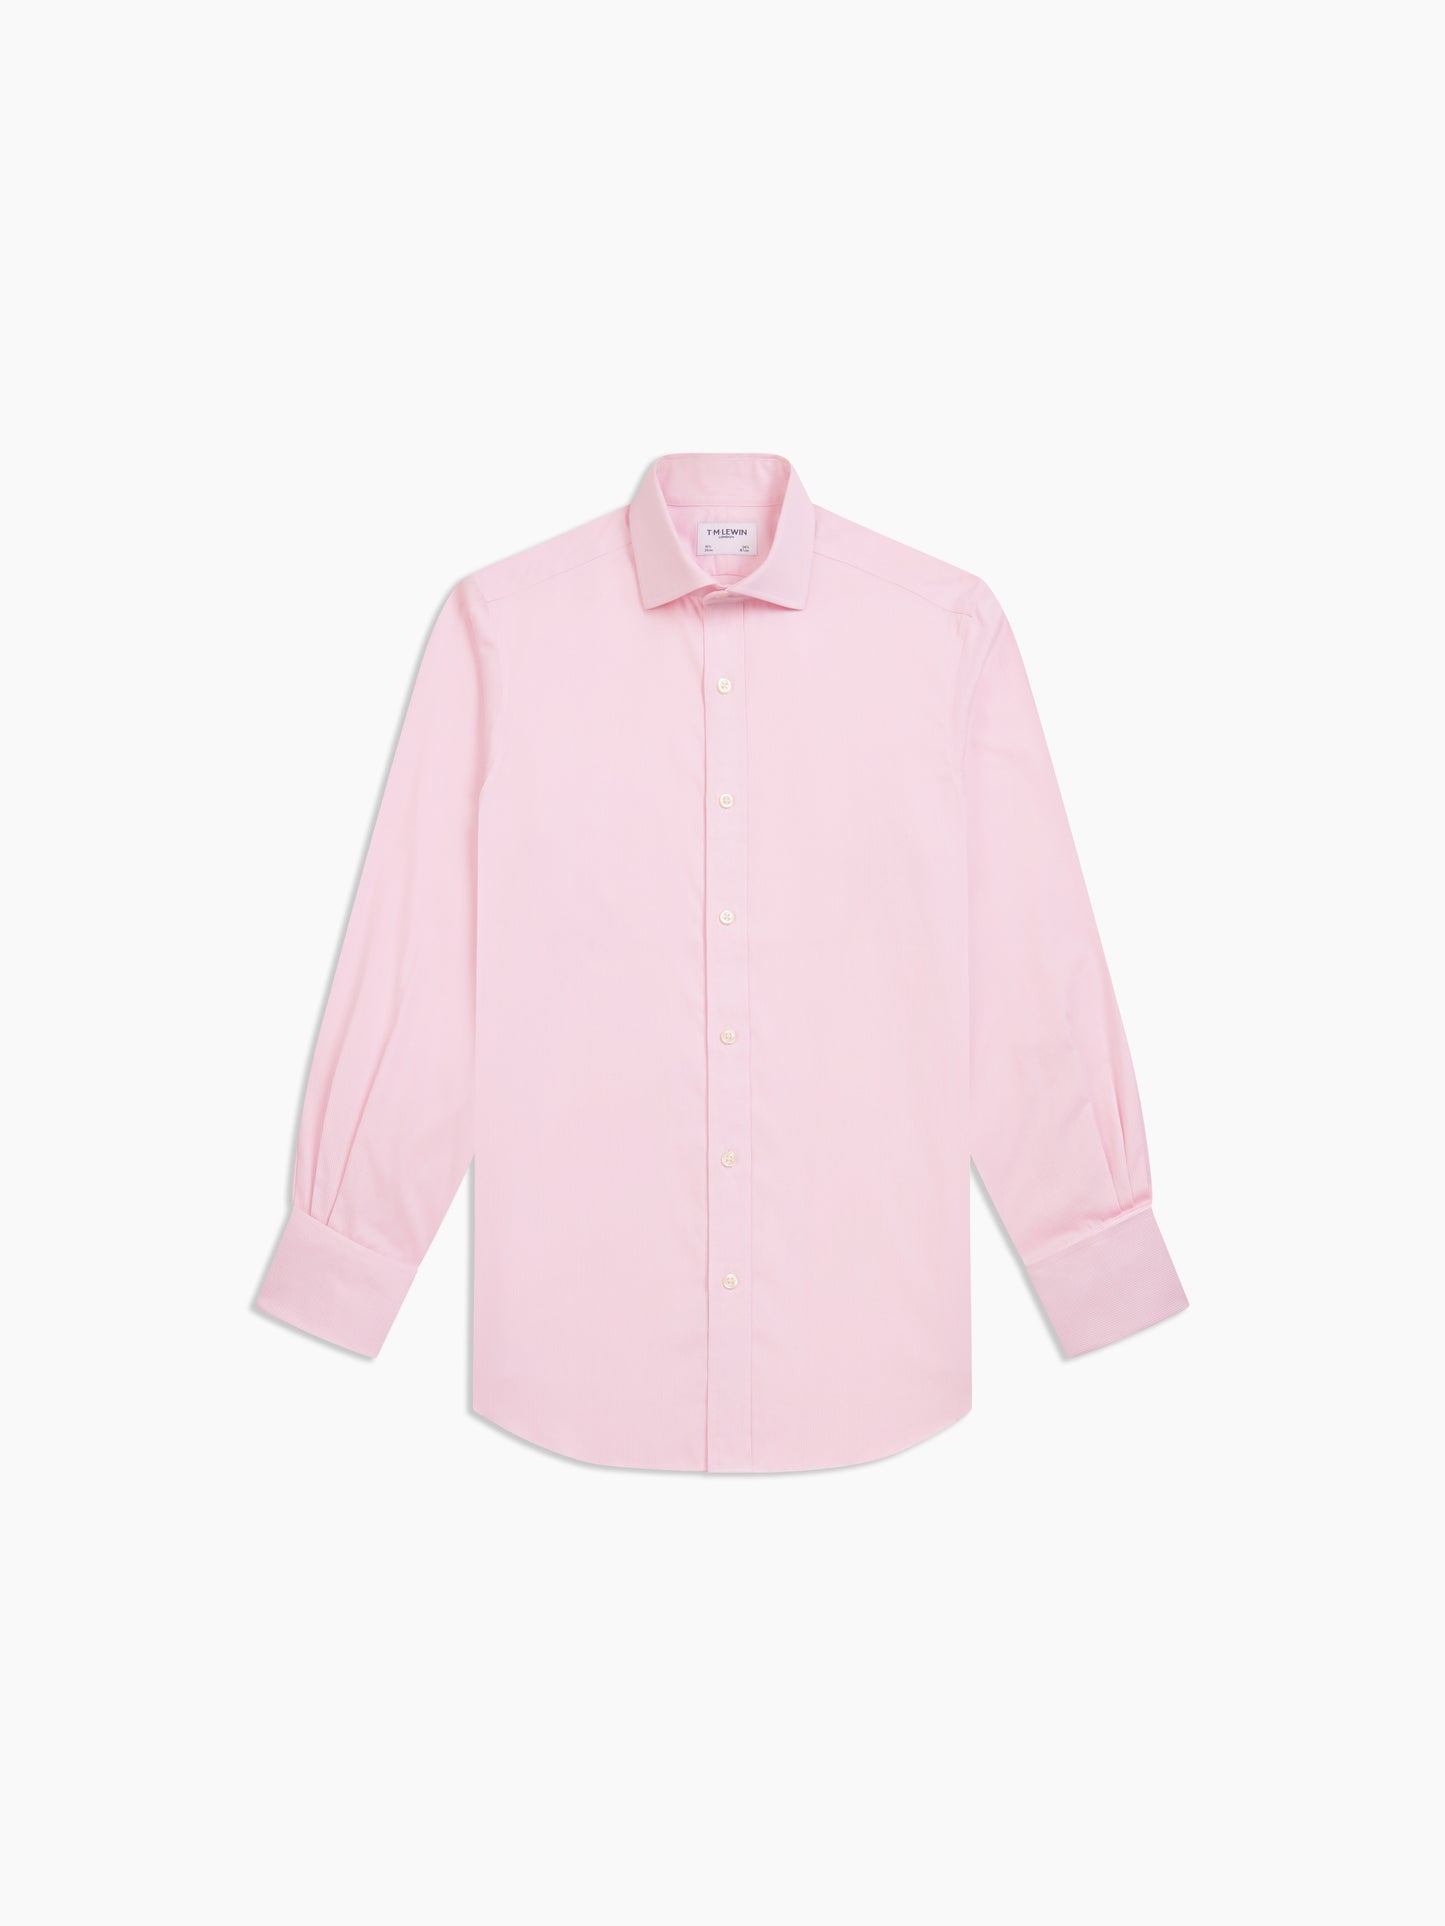 Image 2 of Non-Iron Pink Pinstripe Dobby Slim Fit Dual Cuff Classic Collar Shirt